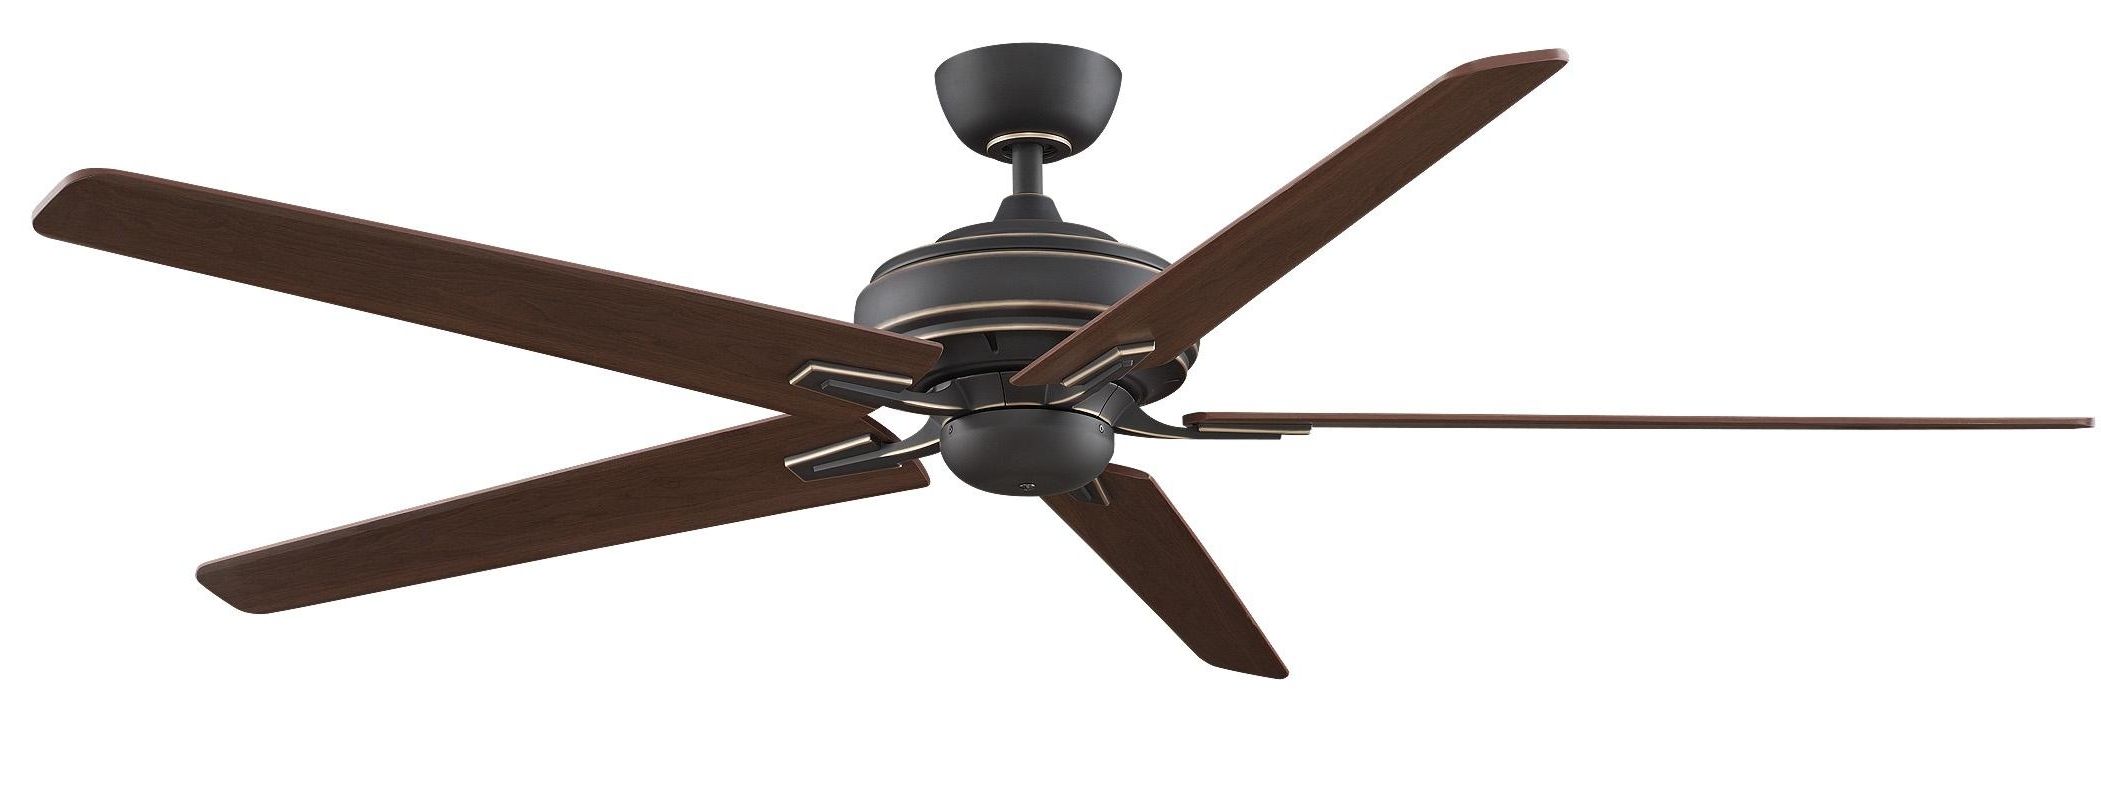 Inch Outdoor Ceiling Fan With 60 Ceiling Fan With Light Within Most Up To Date 60 Inch Outdoor Ceiling Fans With Lights (View 1 of 20)